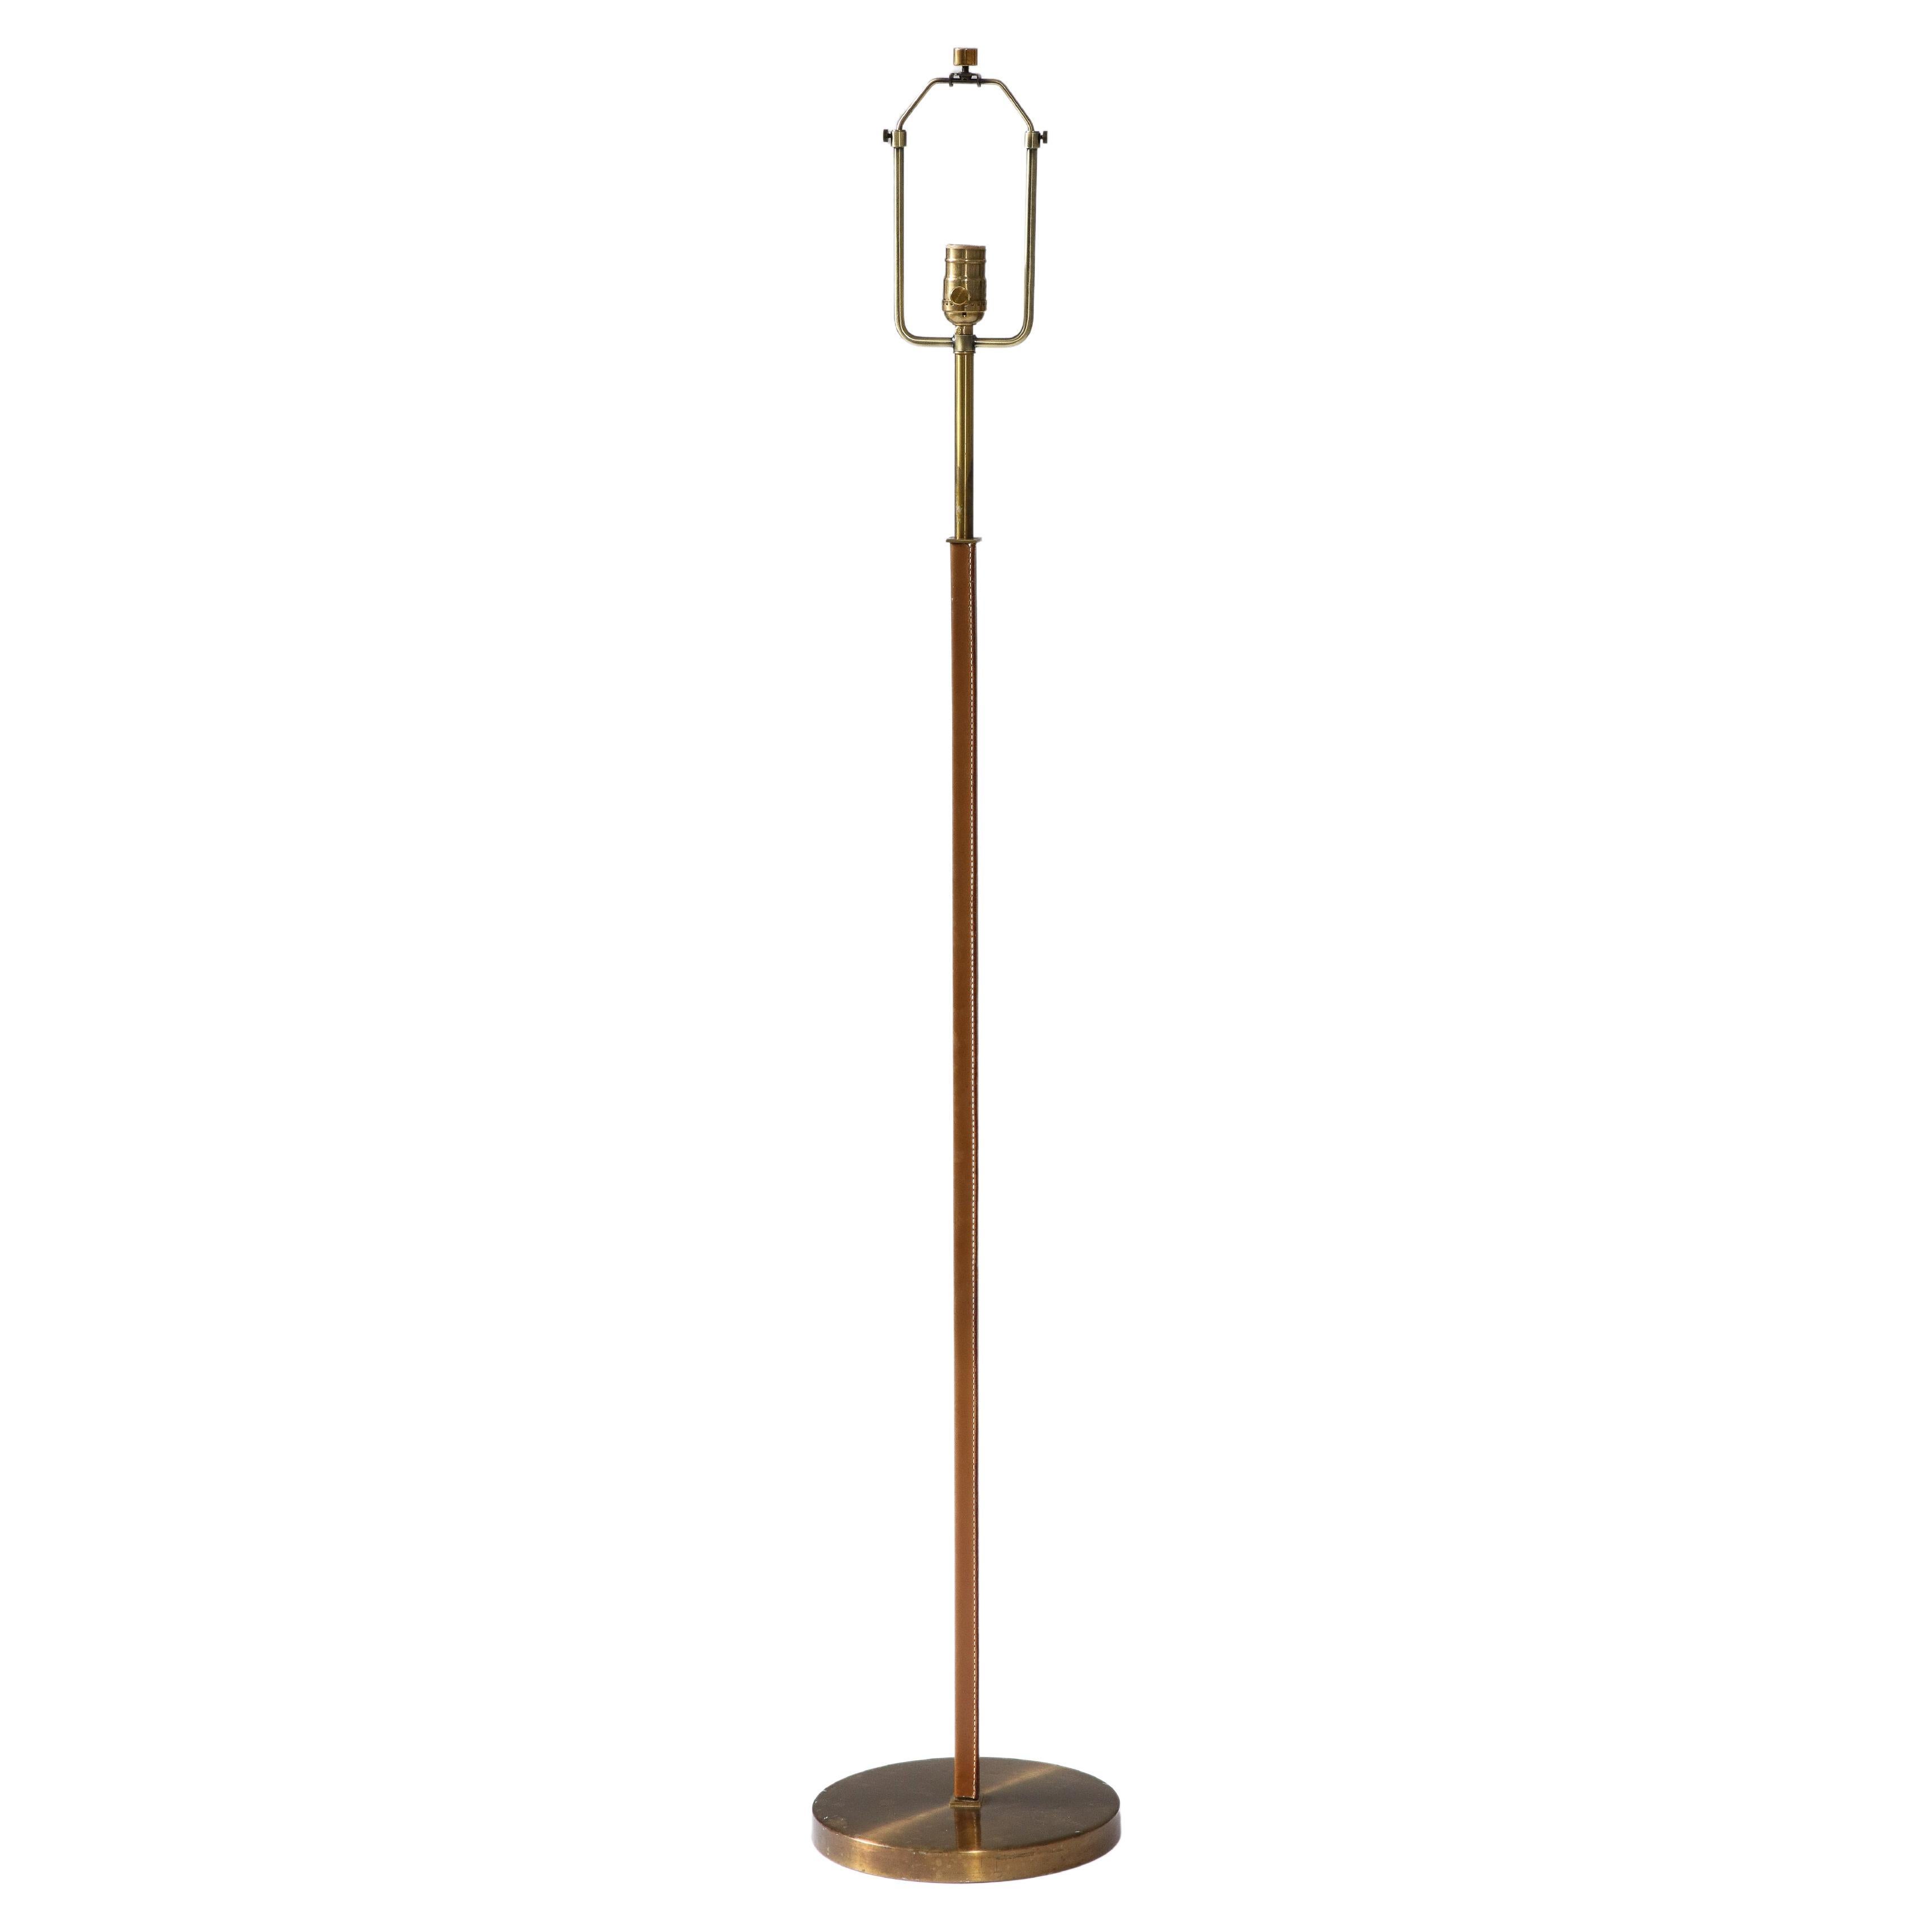 Brass and Leather Floor Lamp by Falkenbergs Belysning, Sweden, c. 1950 For Sale